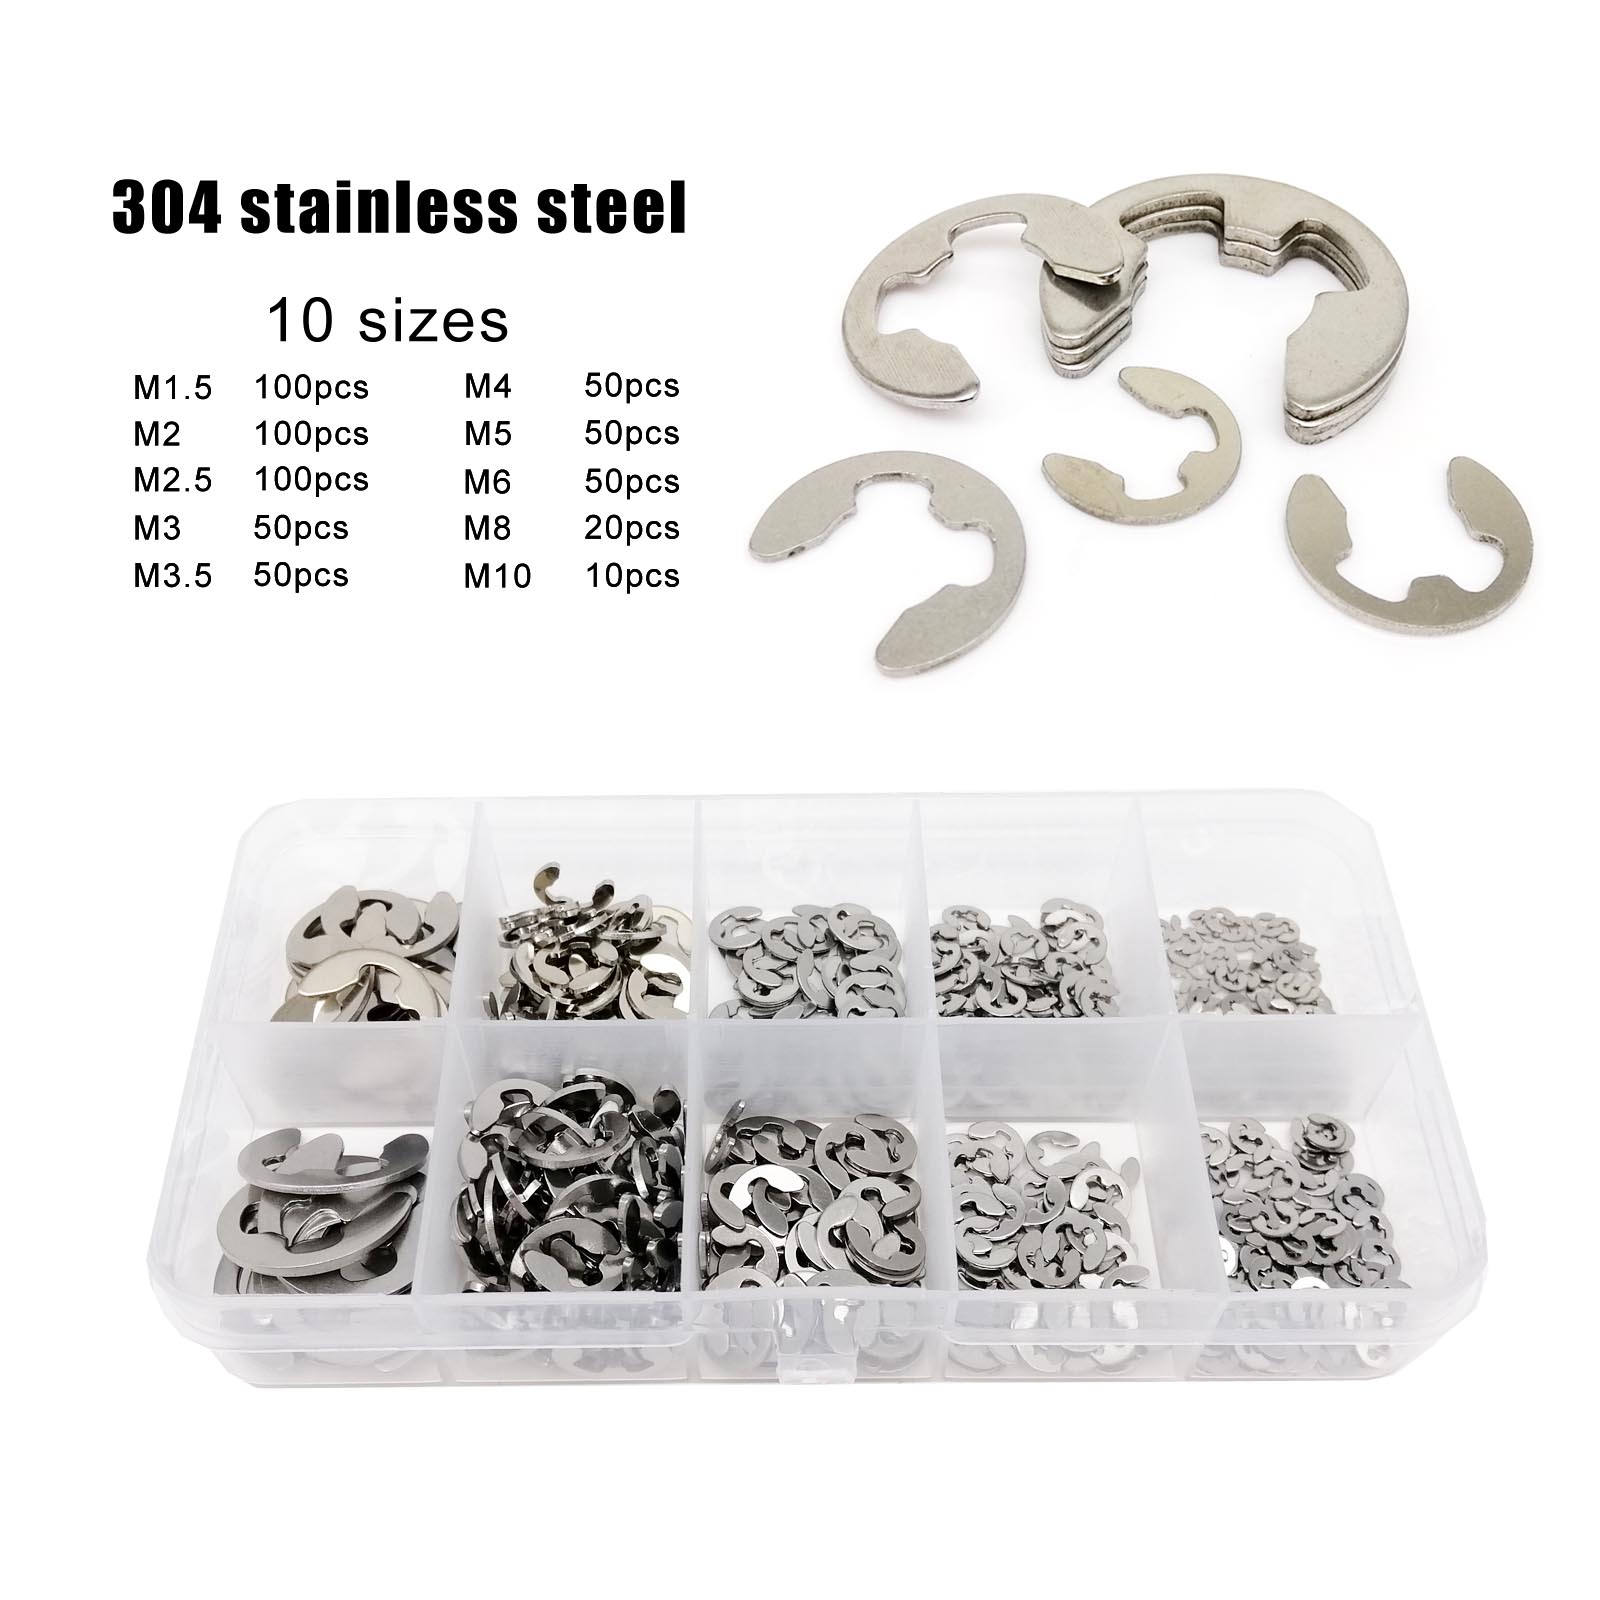 225pcs Black C Clips Snap Ring Shop Assortment, Internal & External Lock  Snap Retaining Ring Circlip for Industrial Fasteners, 18 Sizes